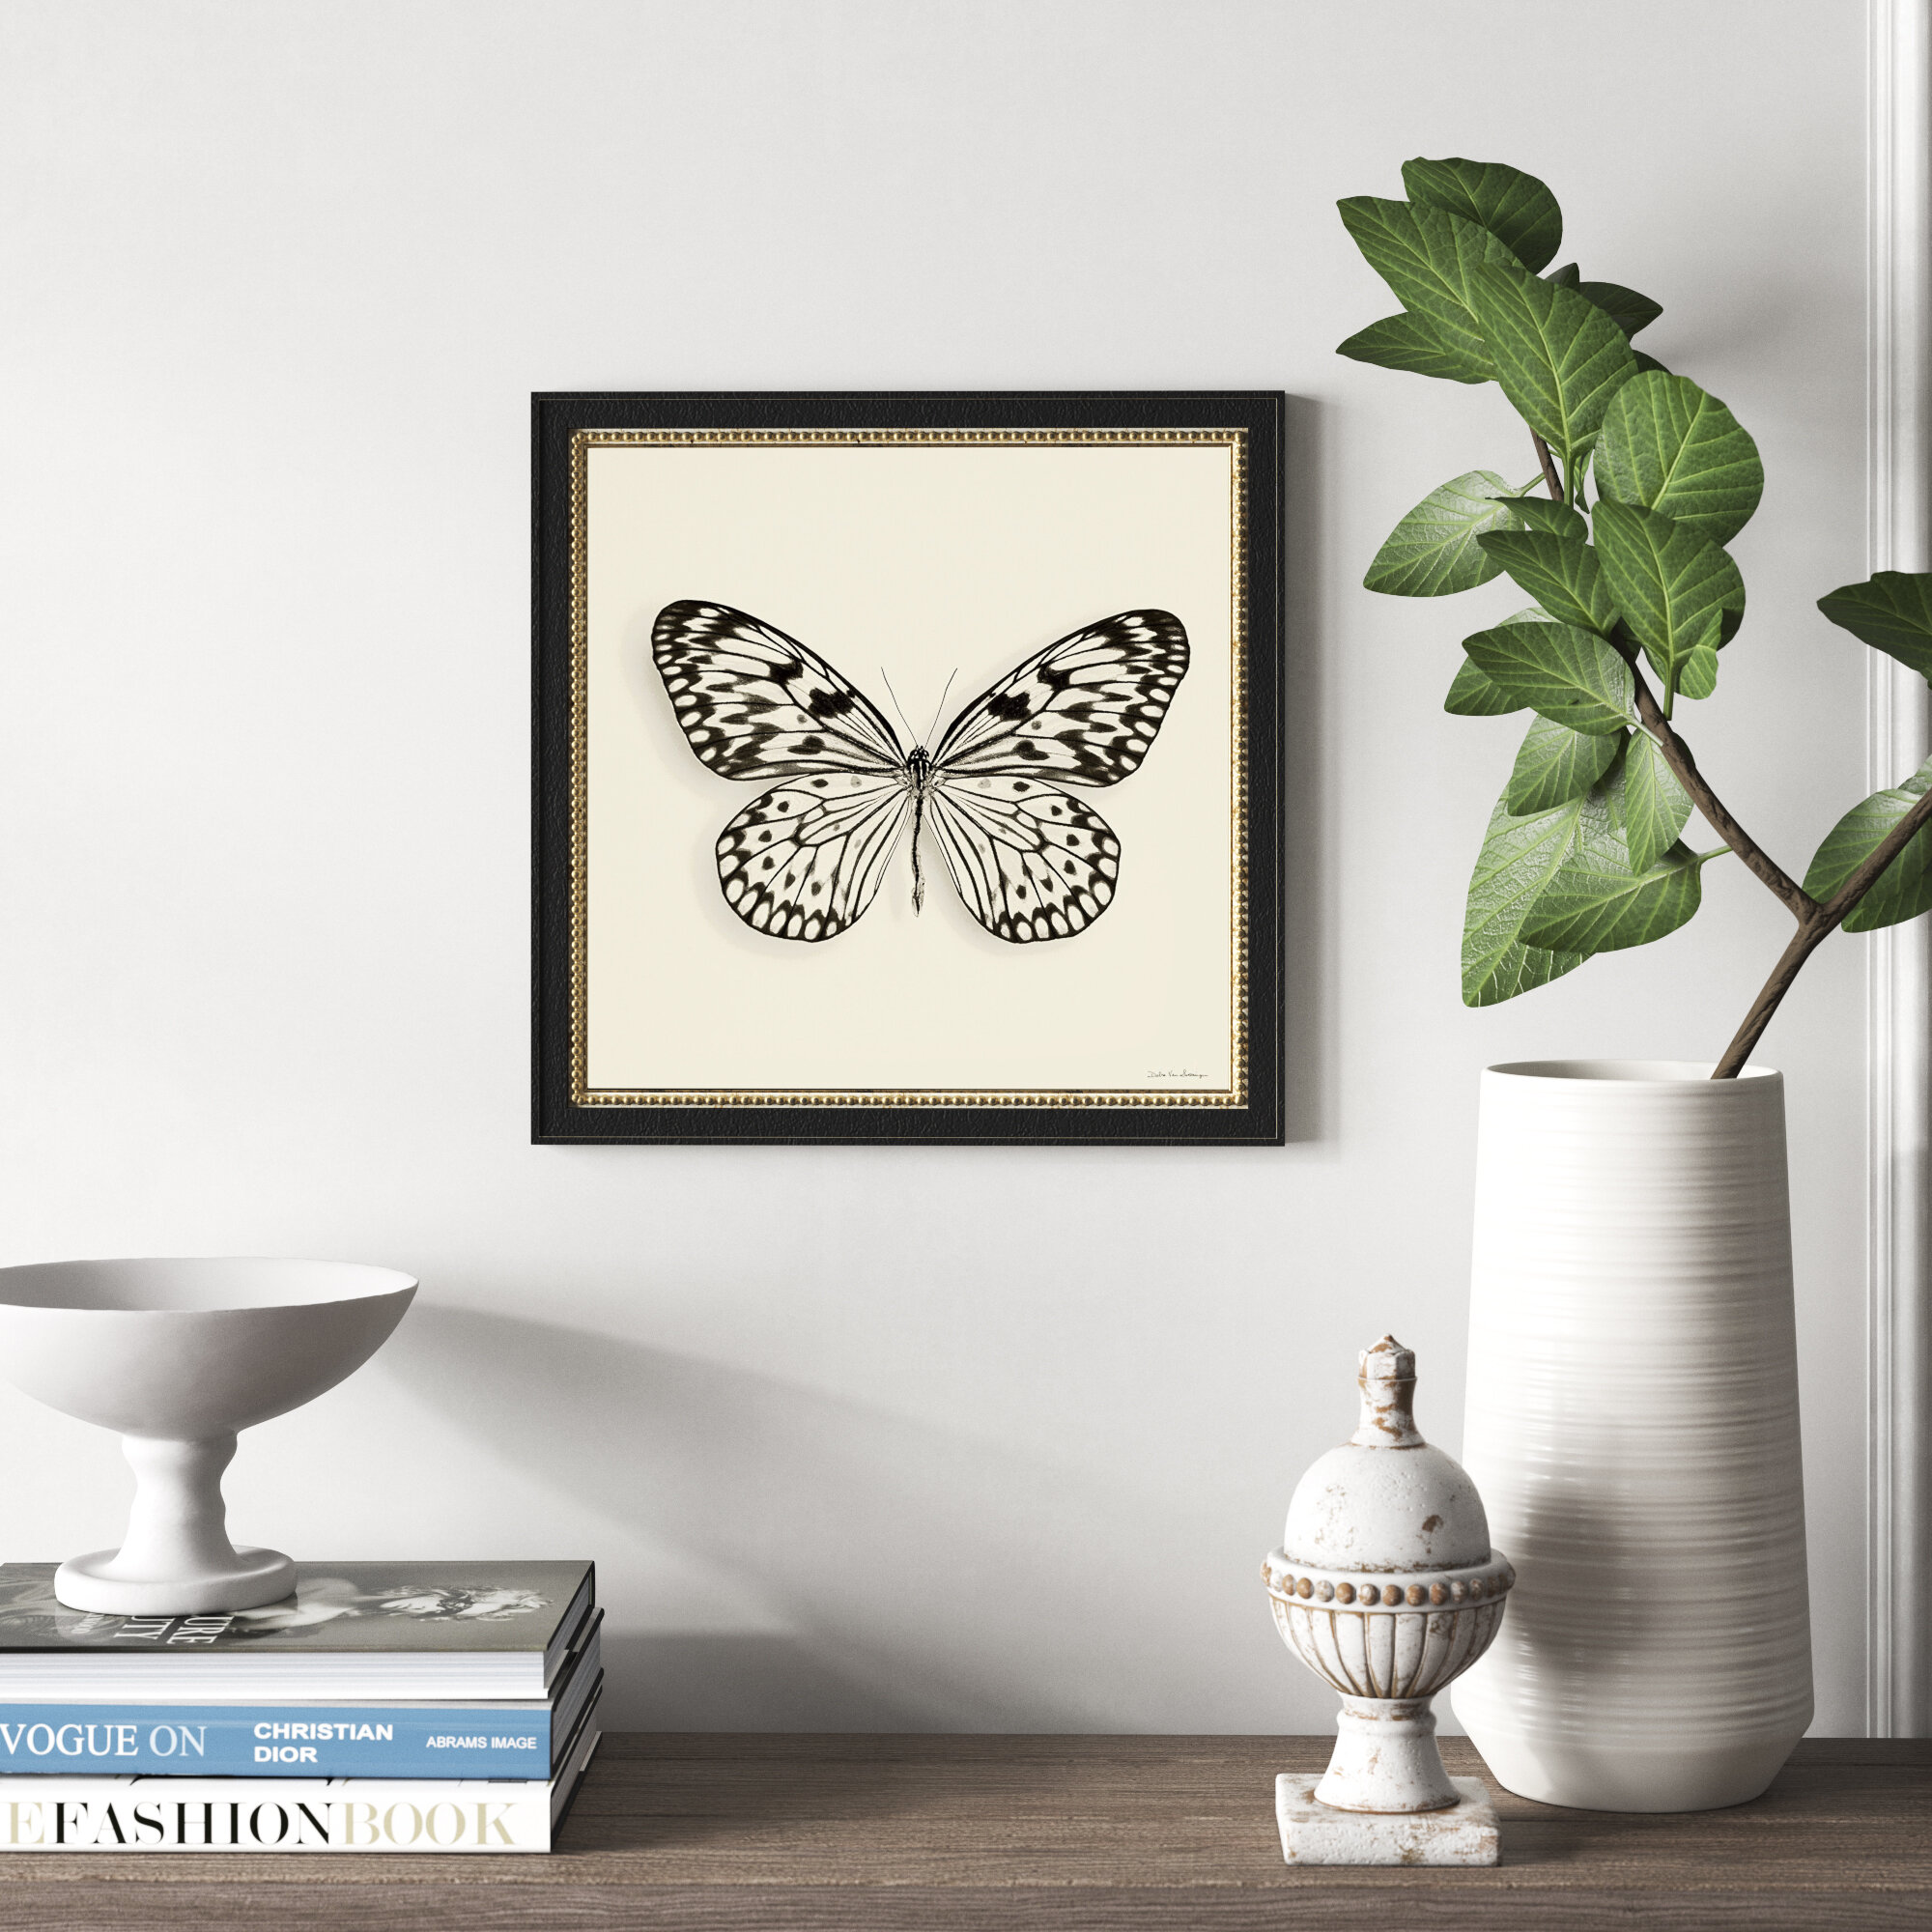 Square Animal Photo Canvas Small Wall Art Picture Prints Butterfly Orange Flower 